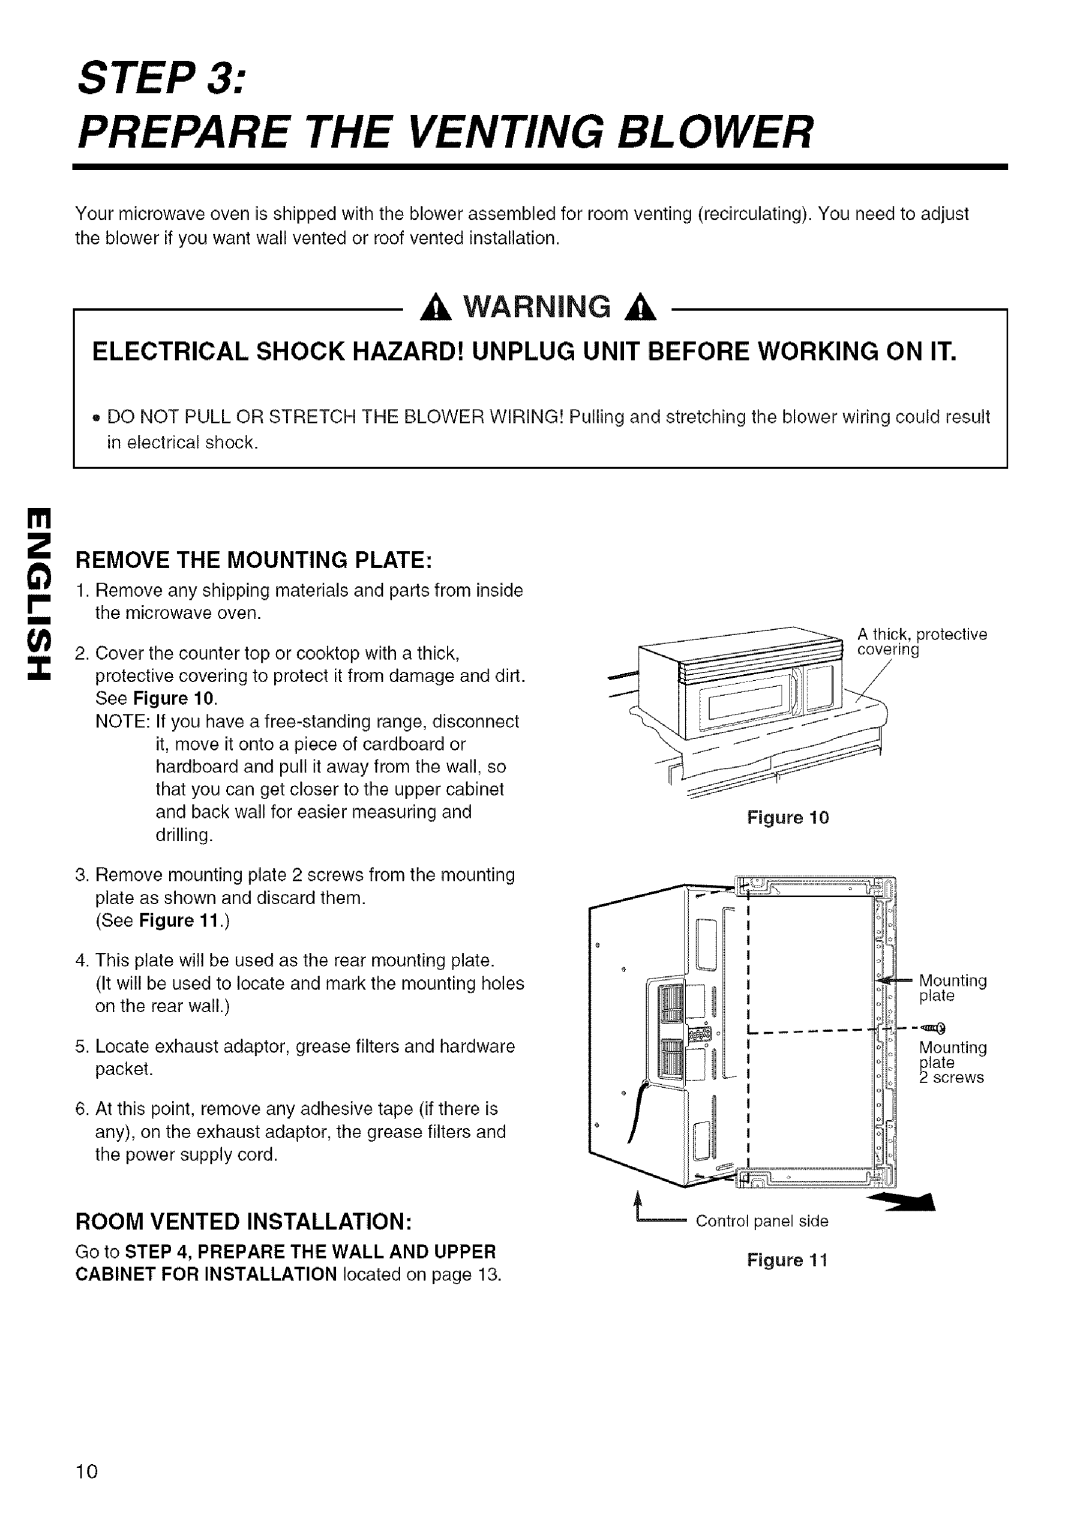 Kenmore 721.80403, 721.80524, 721.80404, 721.80529 Step Prepare The Venting Blower, A. WARNING k, Remove The Mounting Plate 